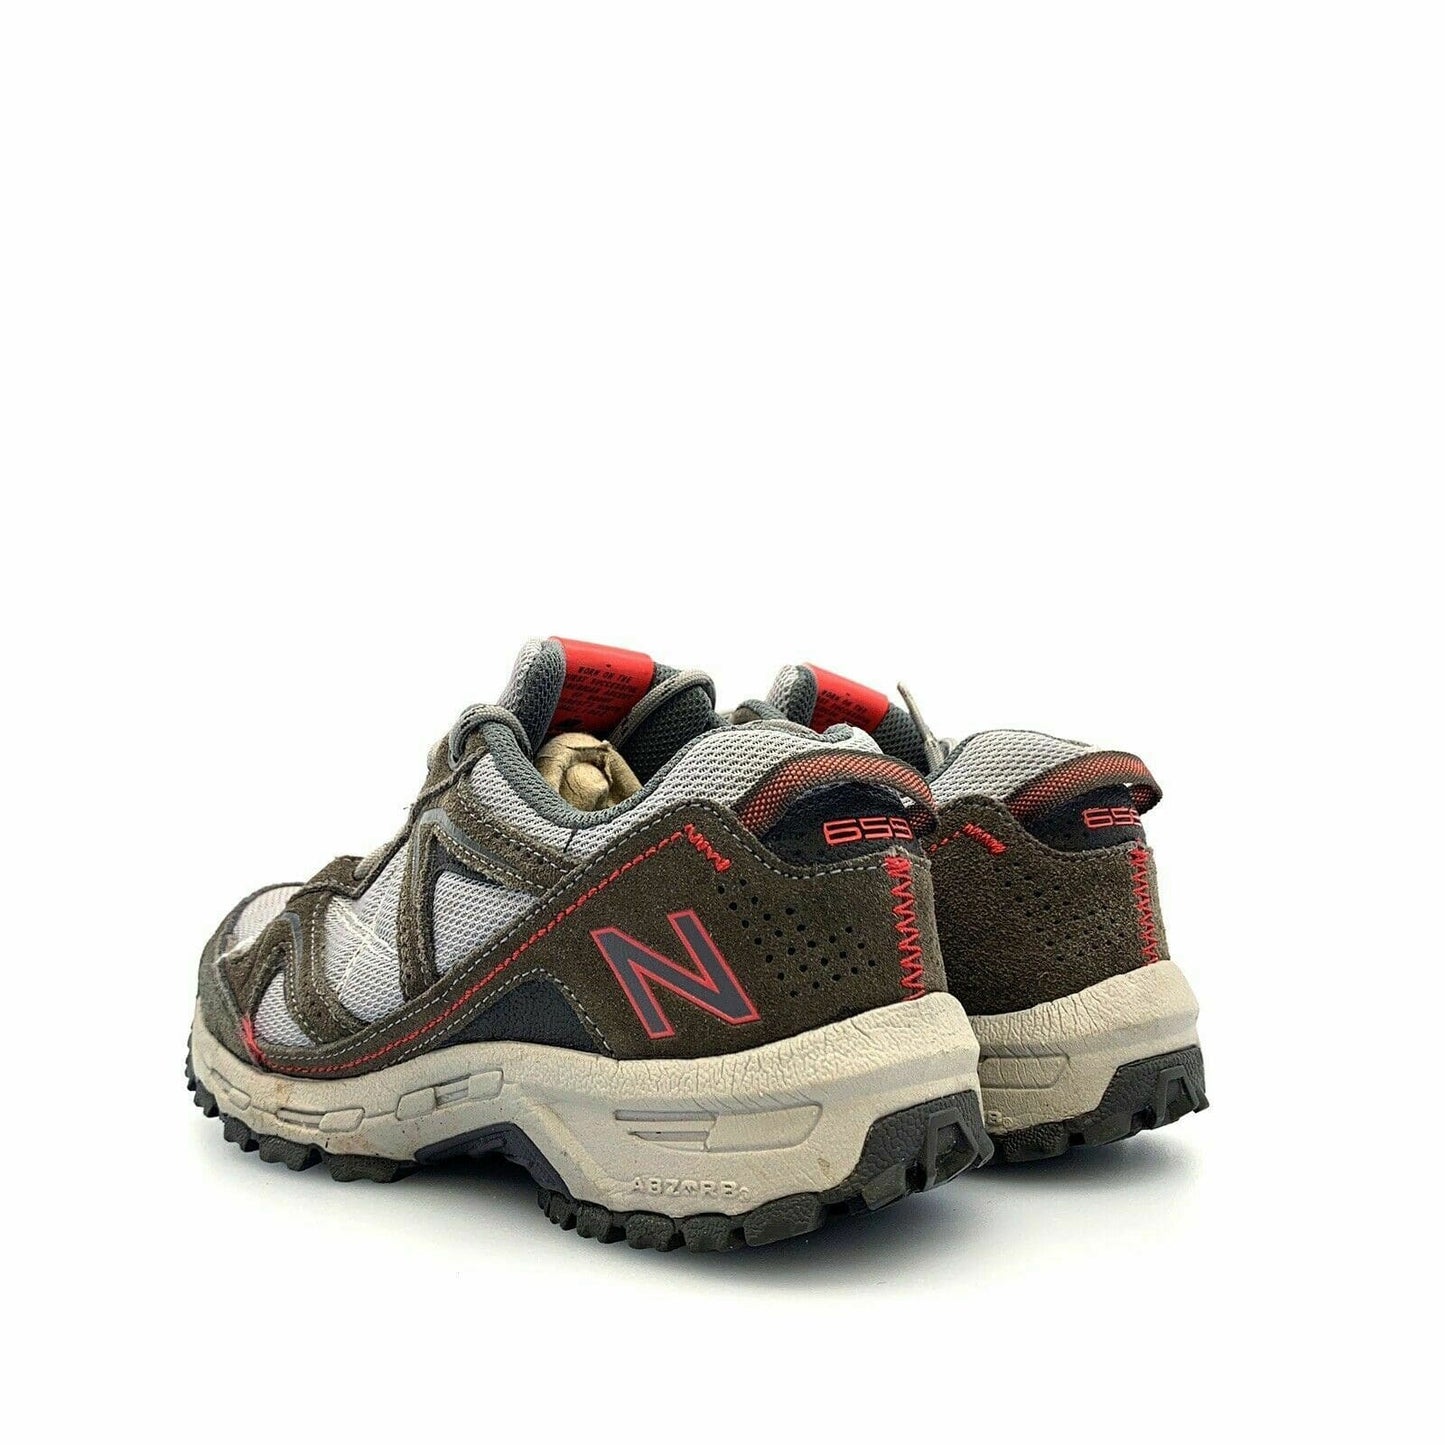 New Balance Womens Size 6.5B Gray Red Walking Shoes WW659 Country Trail Hiking